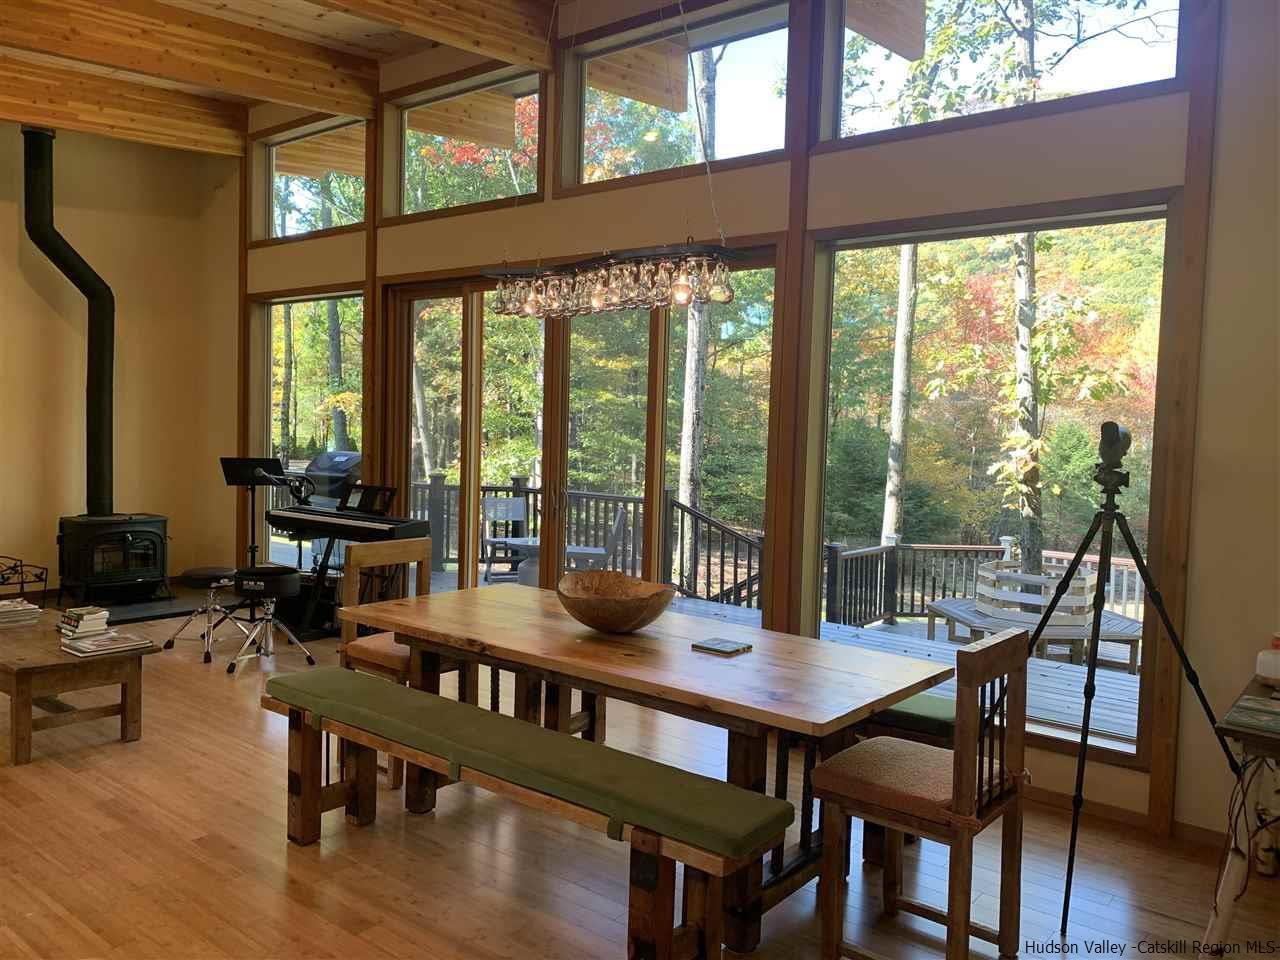 New and Bright Contemporary Home in Woodstock, NY, $1.2M